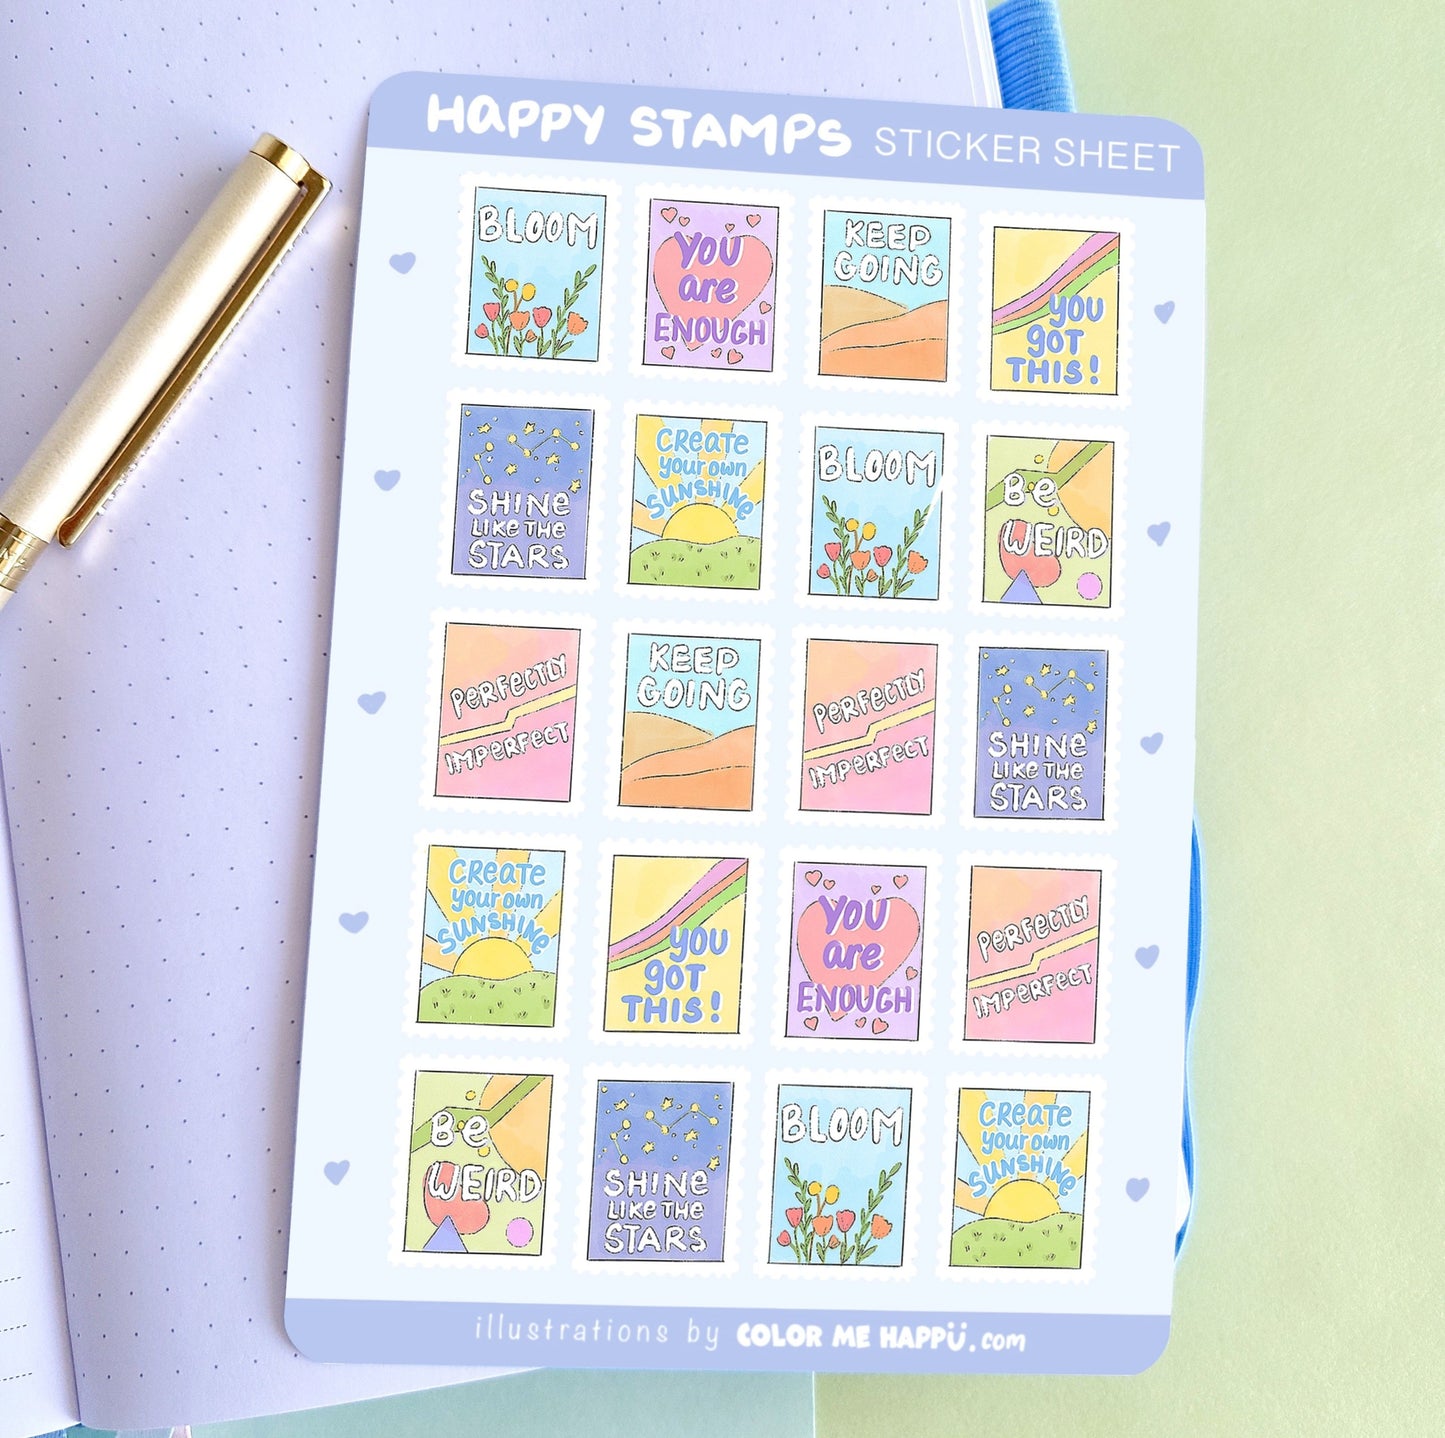 Happy Stamps Sticker Sheet by